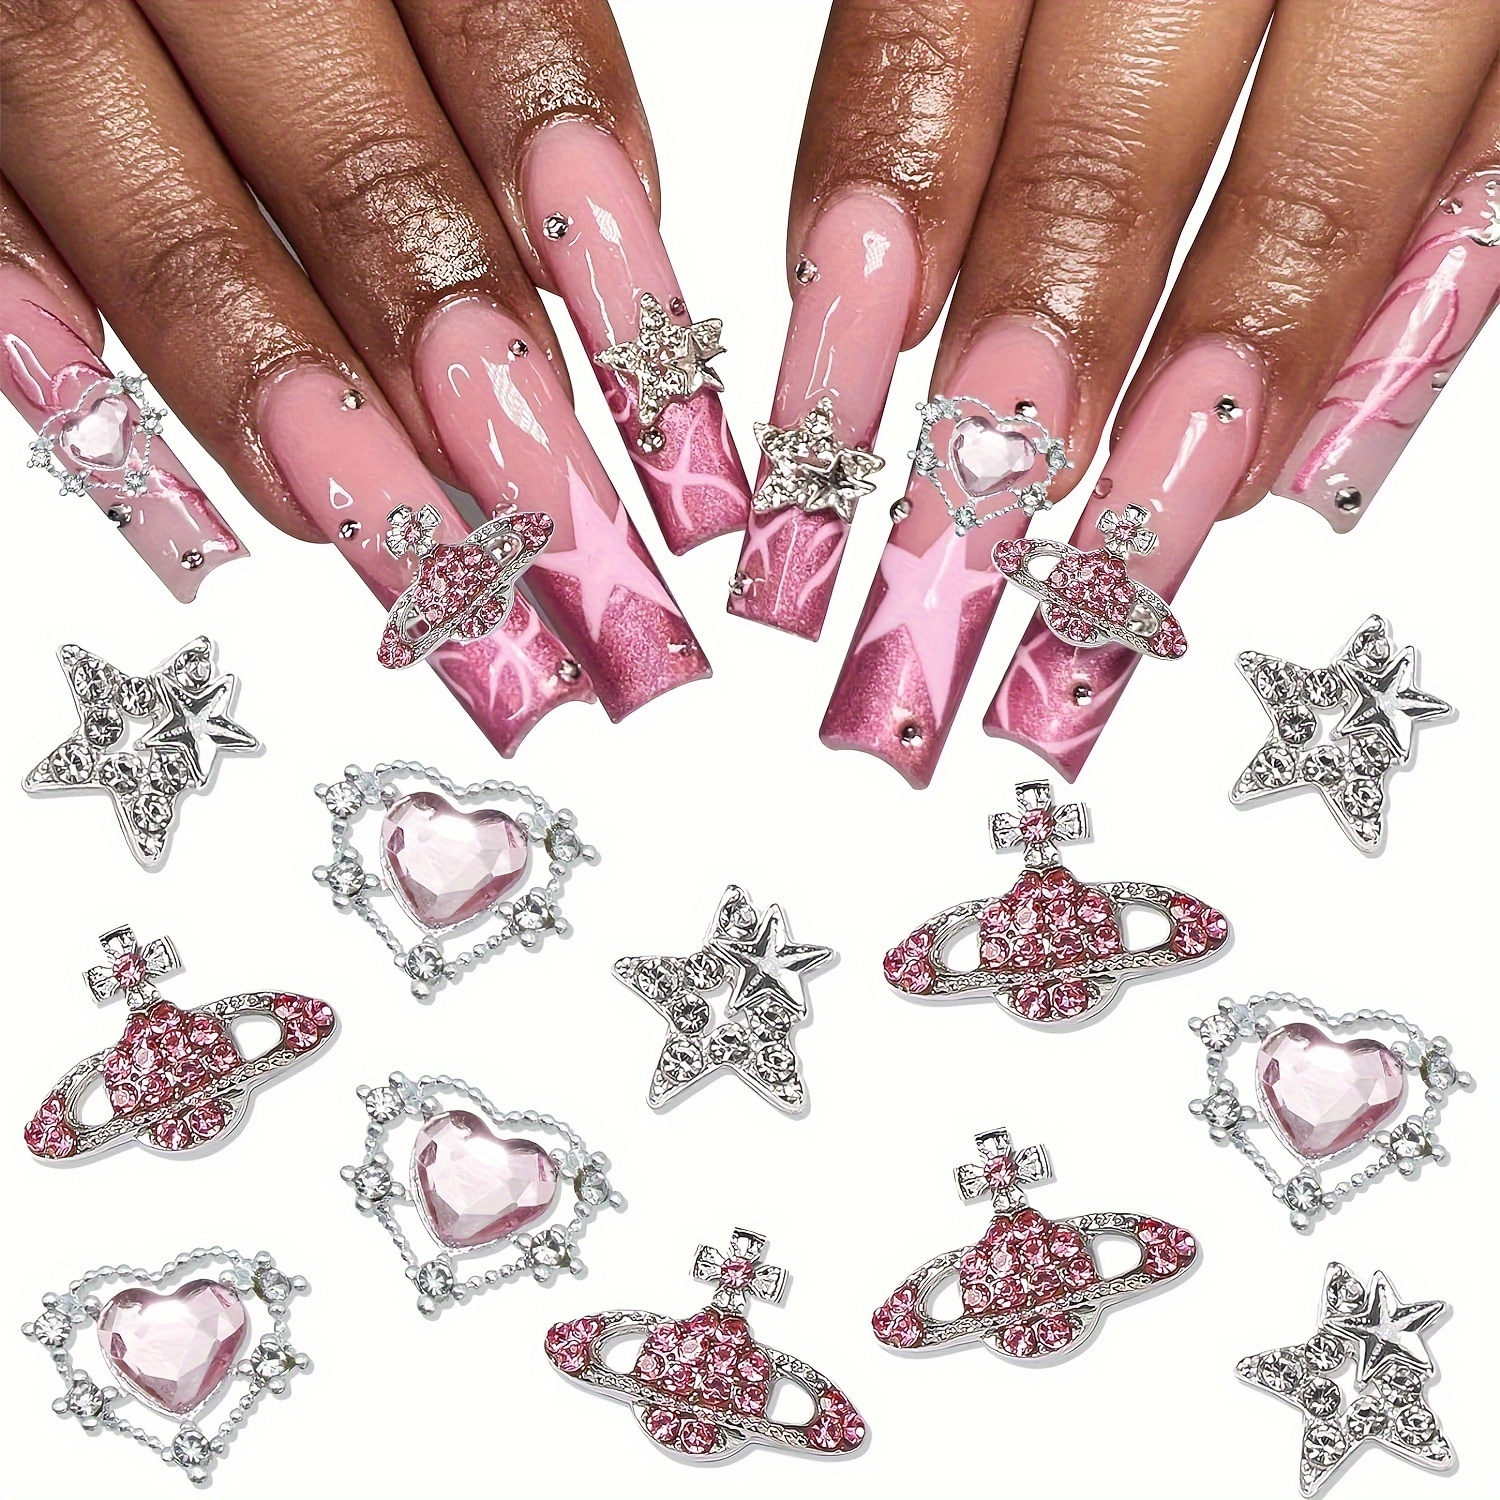 

3d & Planet Star Nail Charms, 15pcs - Sparkling Acrylic Nail Art Jewelry For Women, No Scent, Perfect For Hands & Feet Care